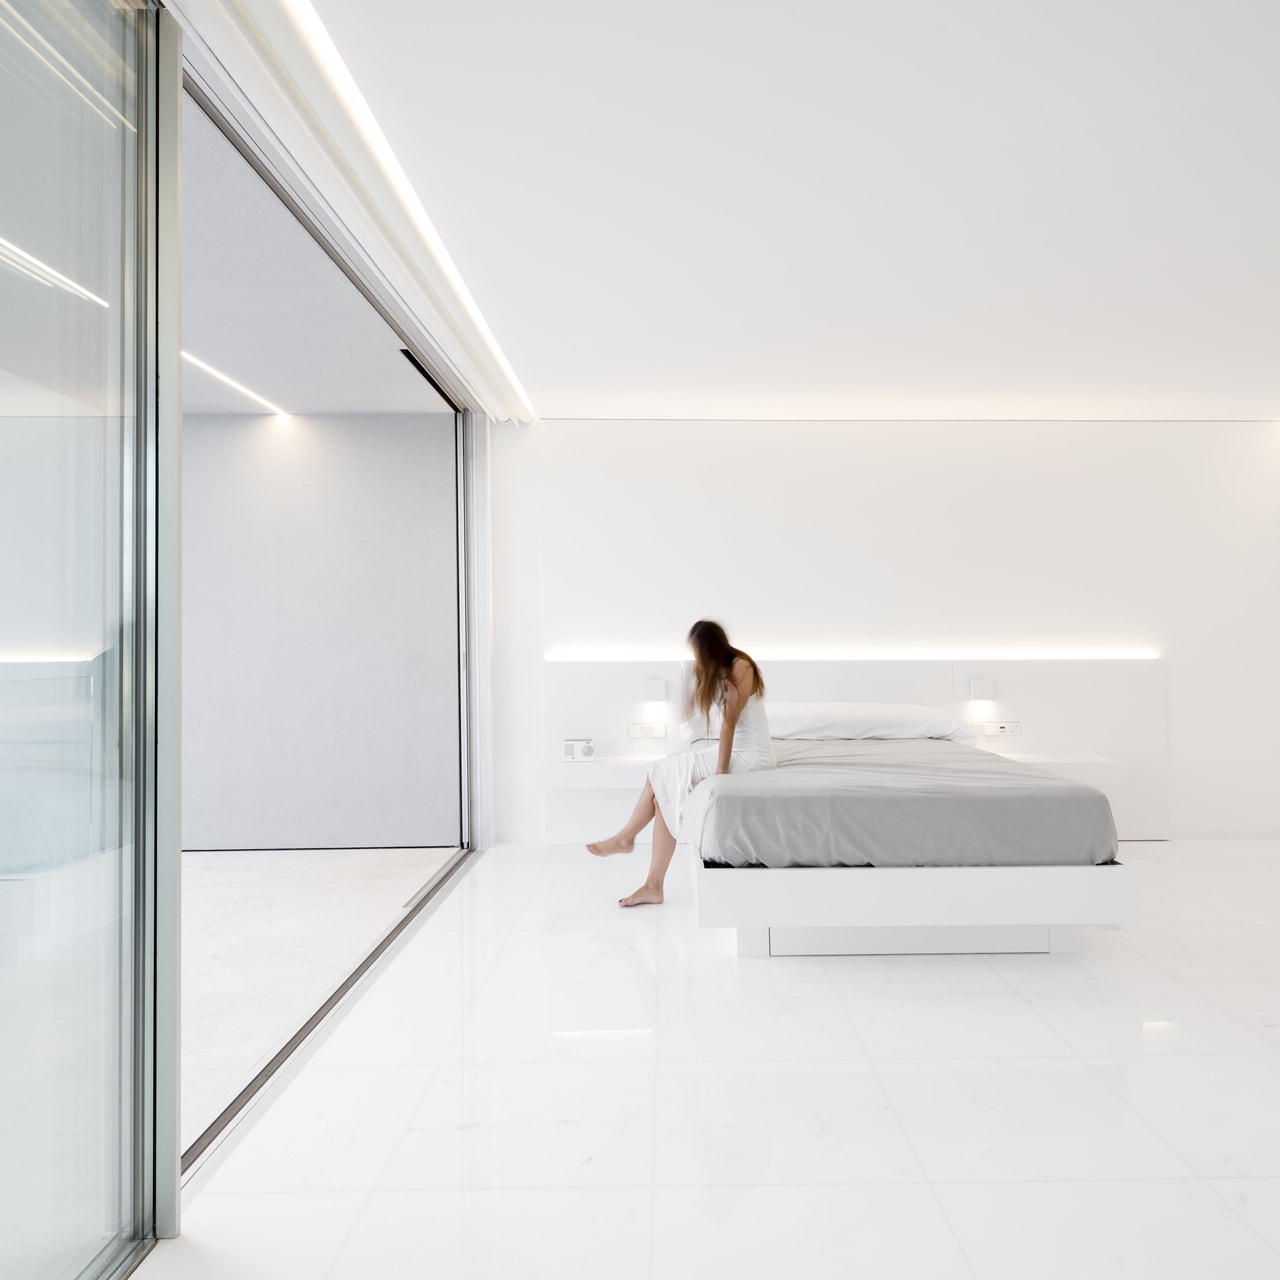 Minimalist bedroom in minimalist house designed by Fran Silvestre Architects